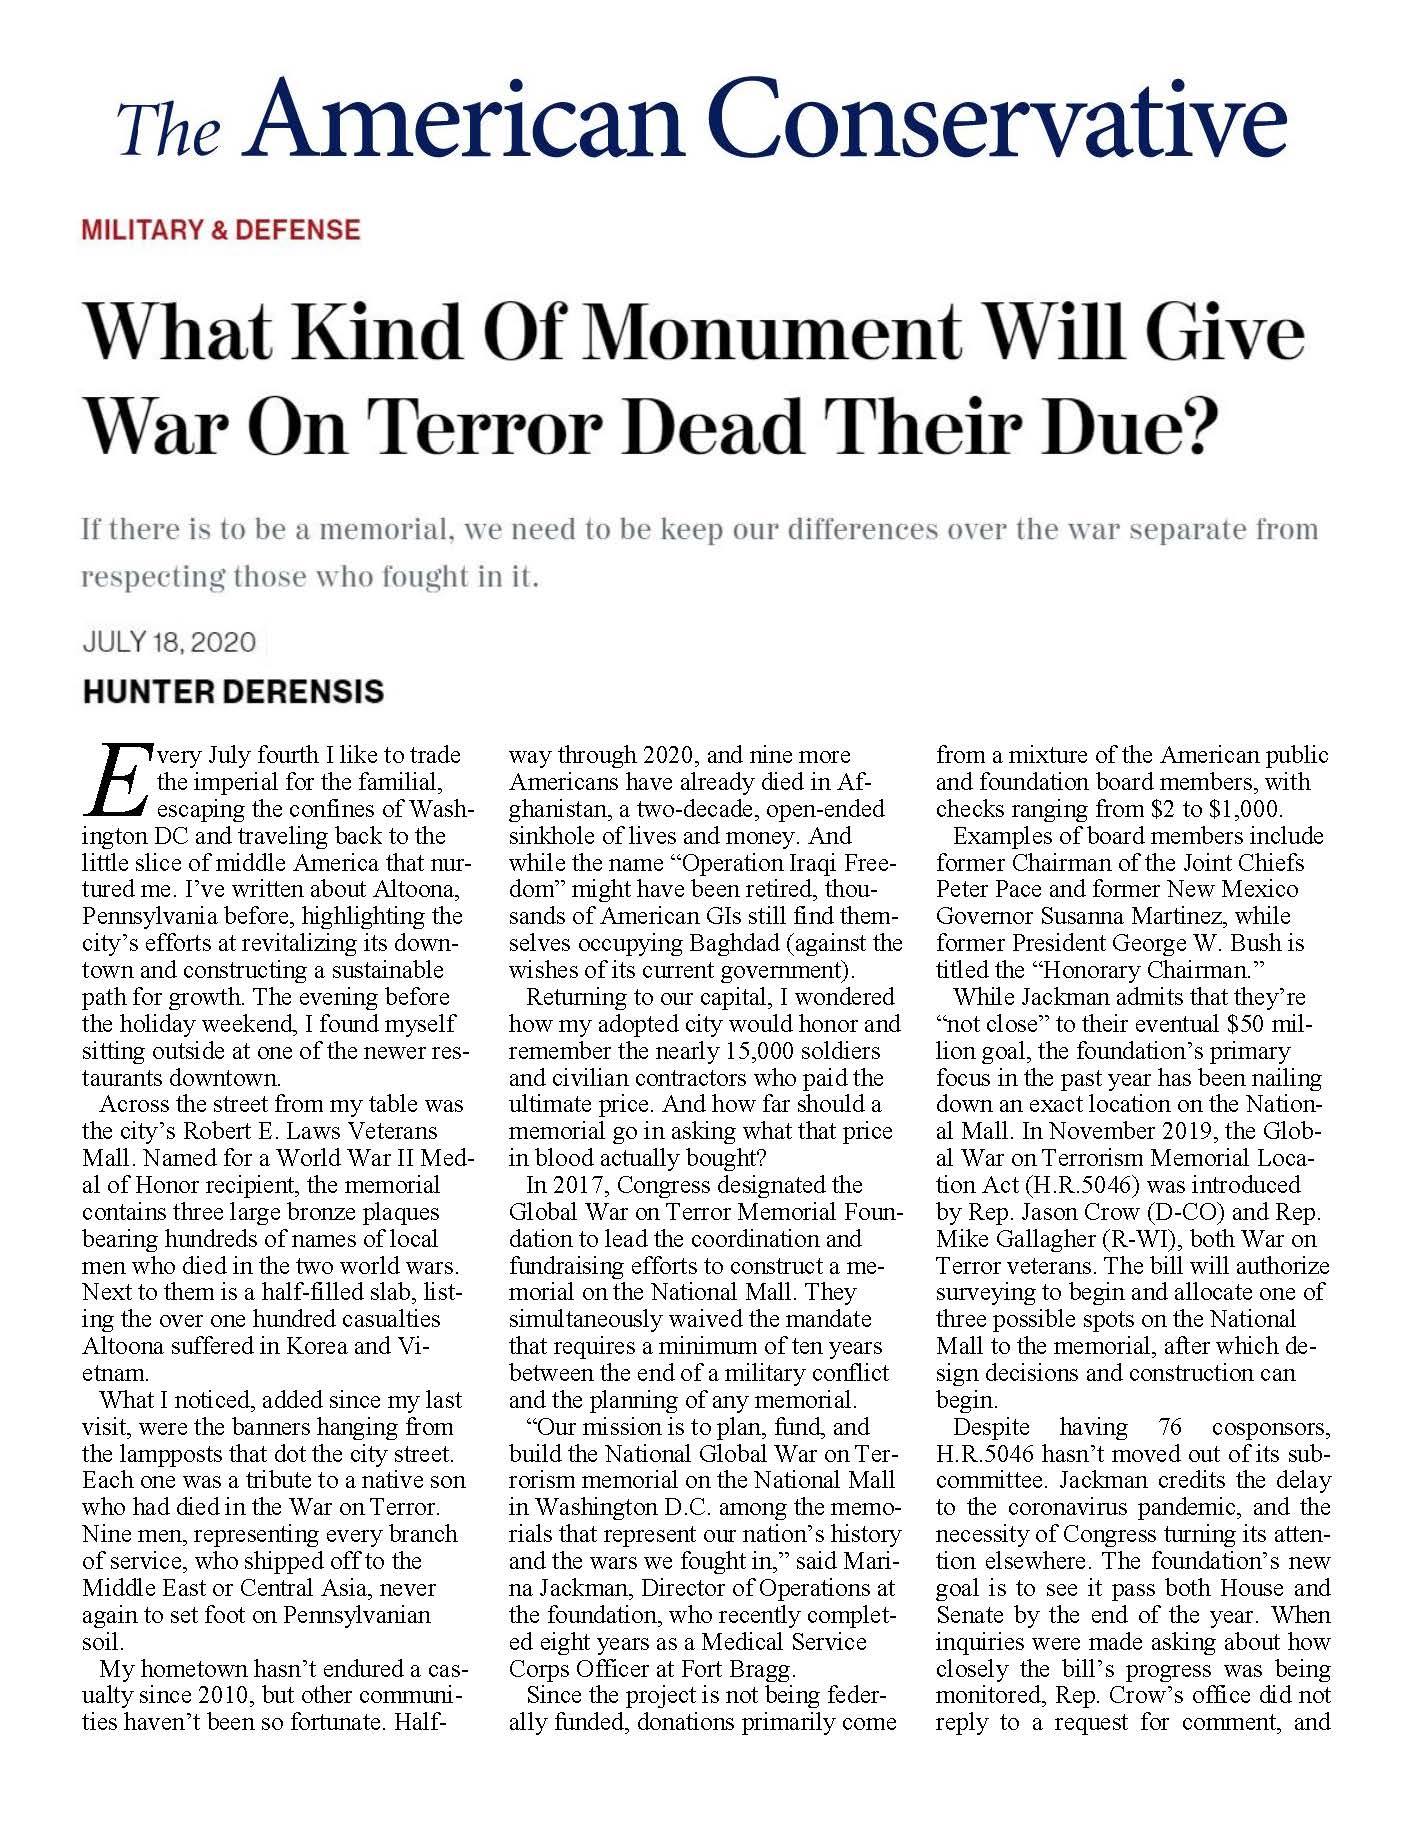 What Kind Of Monument Will Give War On Terror Dead Their Due?